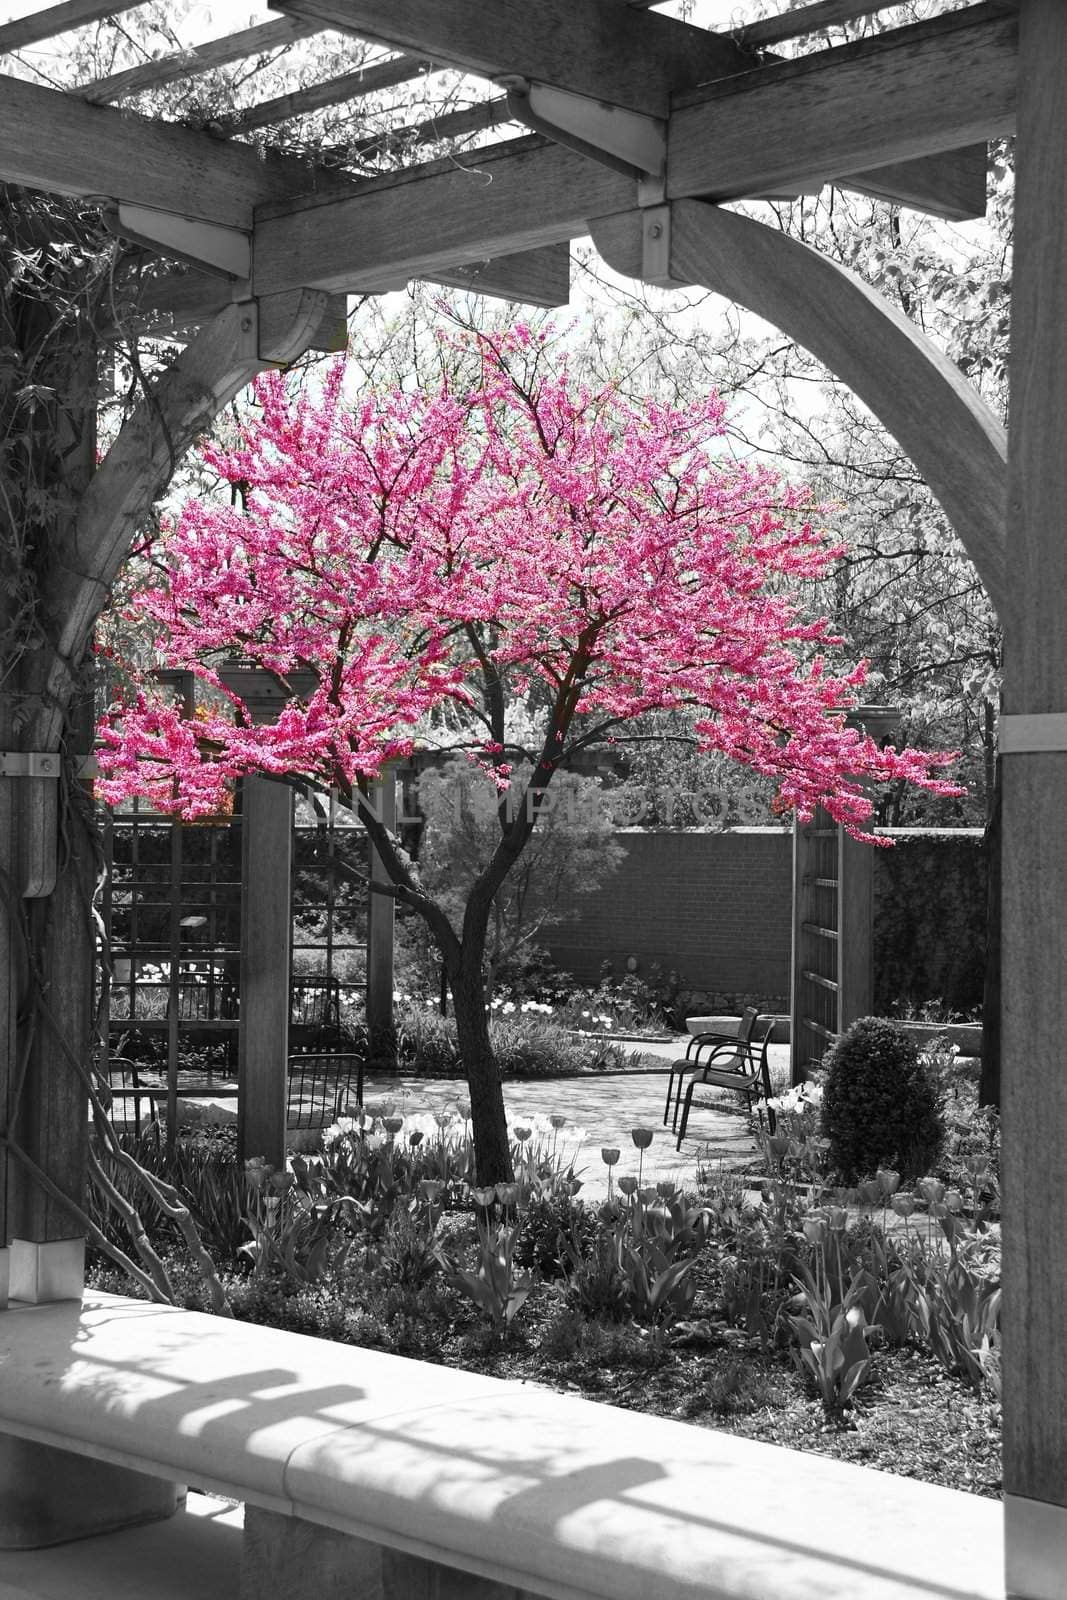 Colorful flowers framed by an arch in a selective color image.